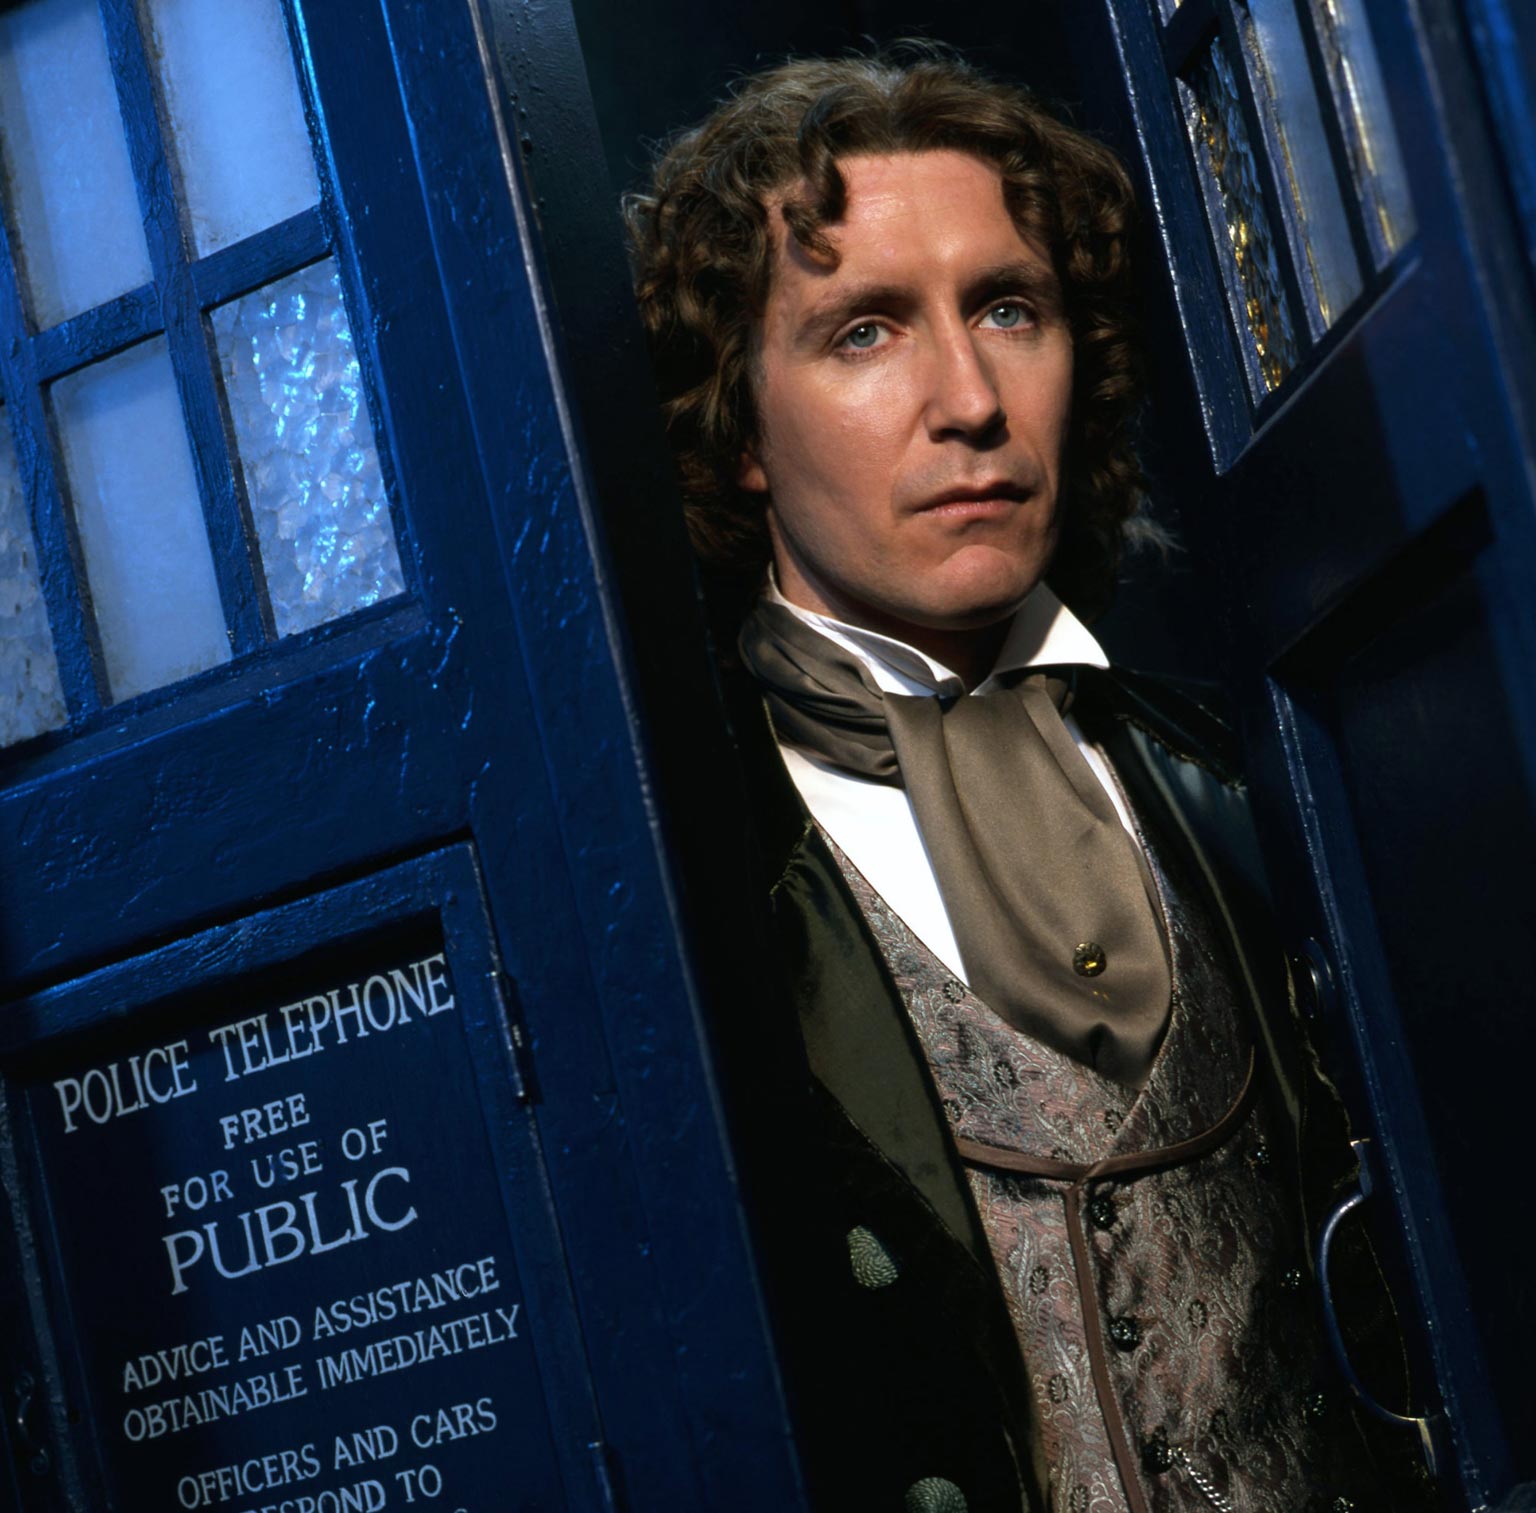 Paul McGann played the Doctor for one adventure in the 1996 film